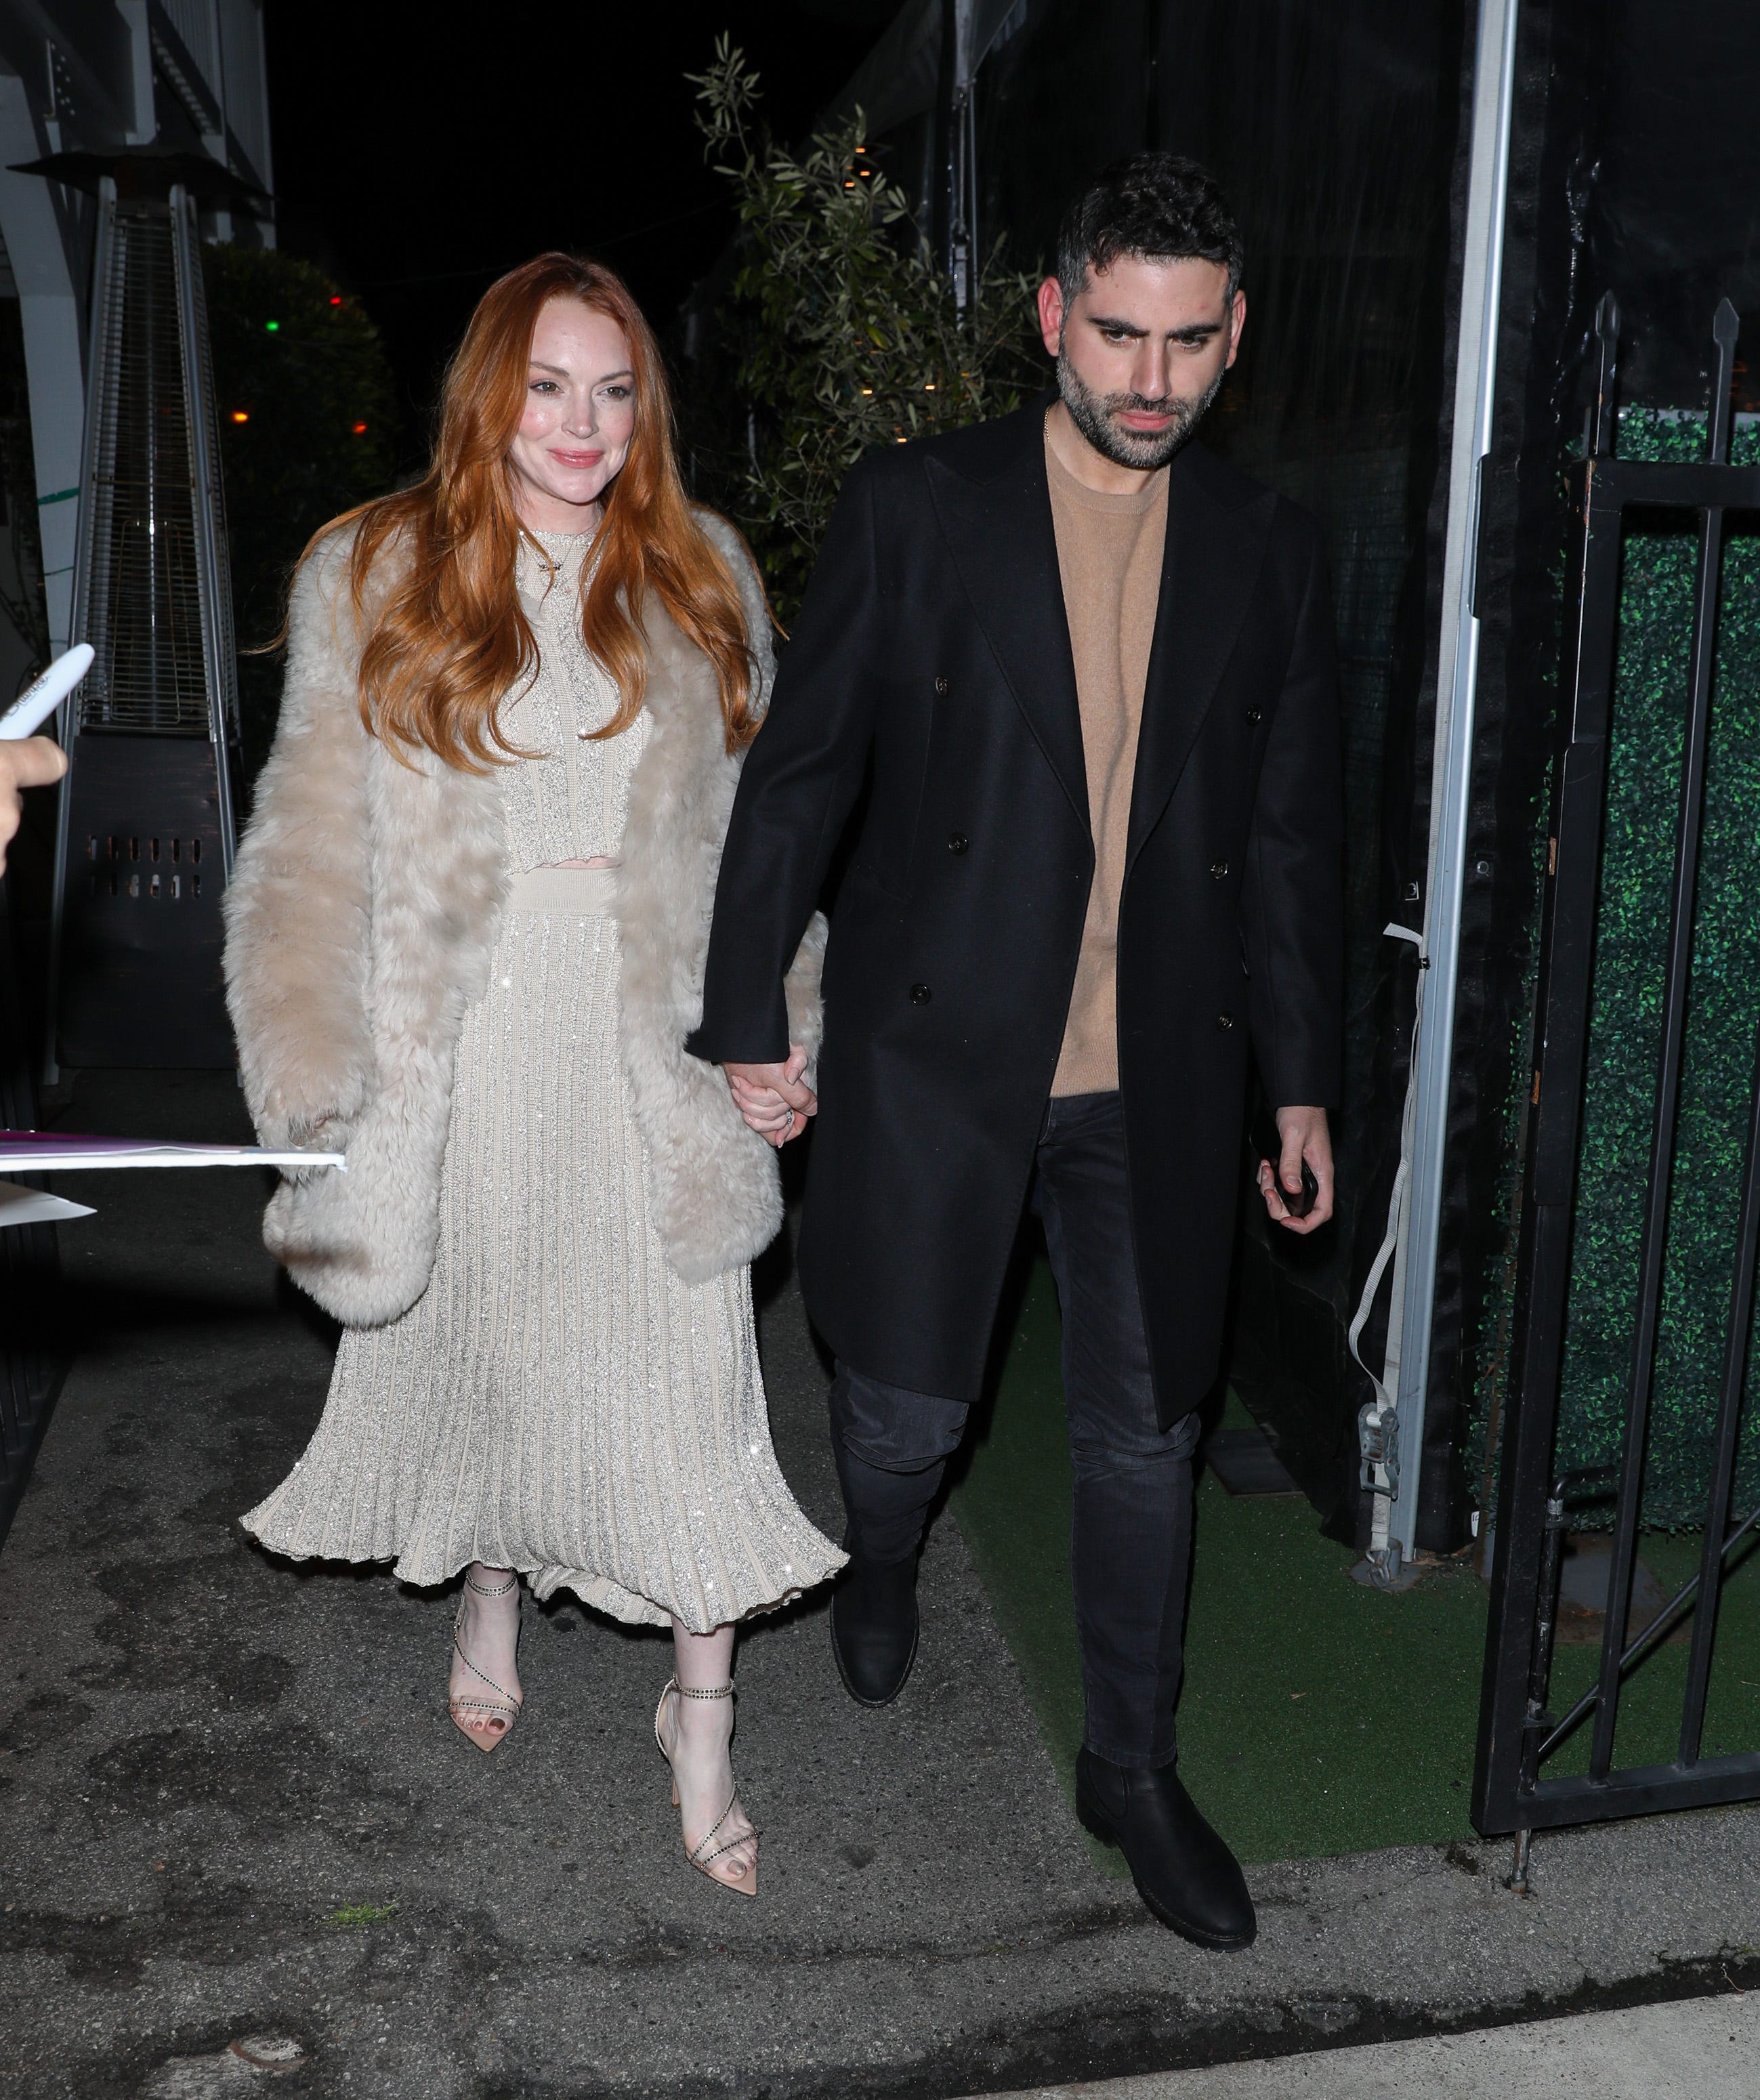 Lindsay Lohan Is Lovely in a Glittery Champagne Co-Ord and Luscious Fur Coat